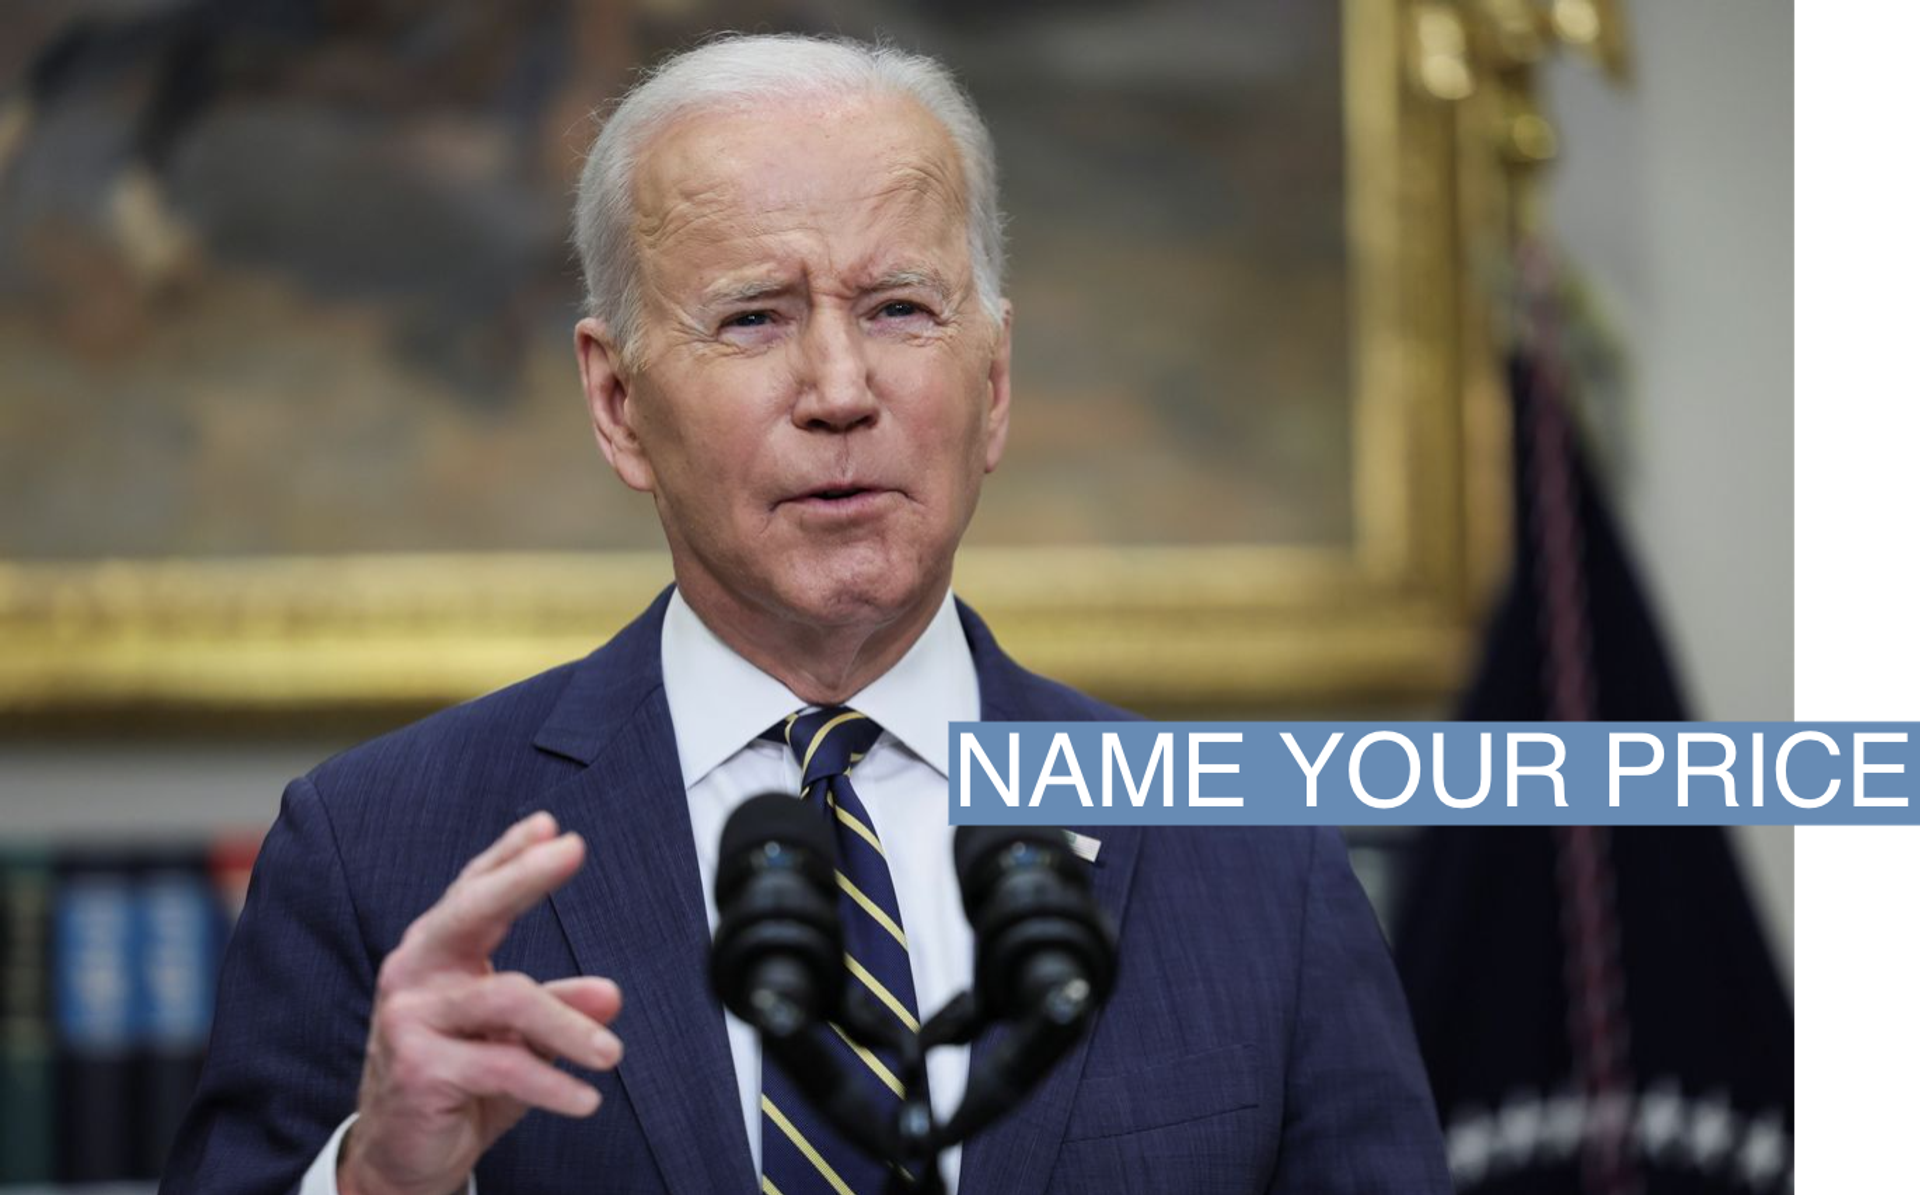 U.S. President Joe Biden announces new actions against Russia for its war on Ukraine, during remarks in the Roosevelt Room at the White House in Washington, U.S., March 11, 2022.